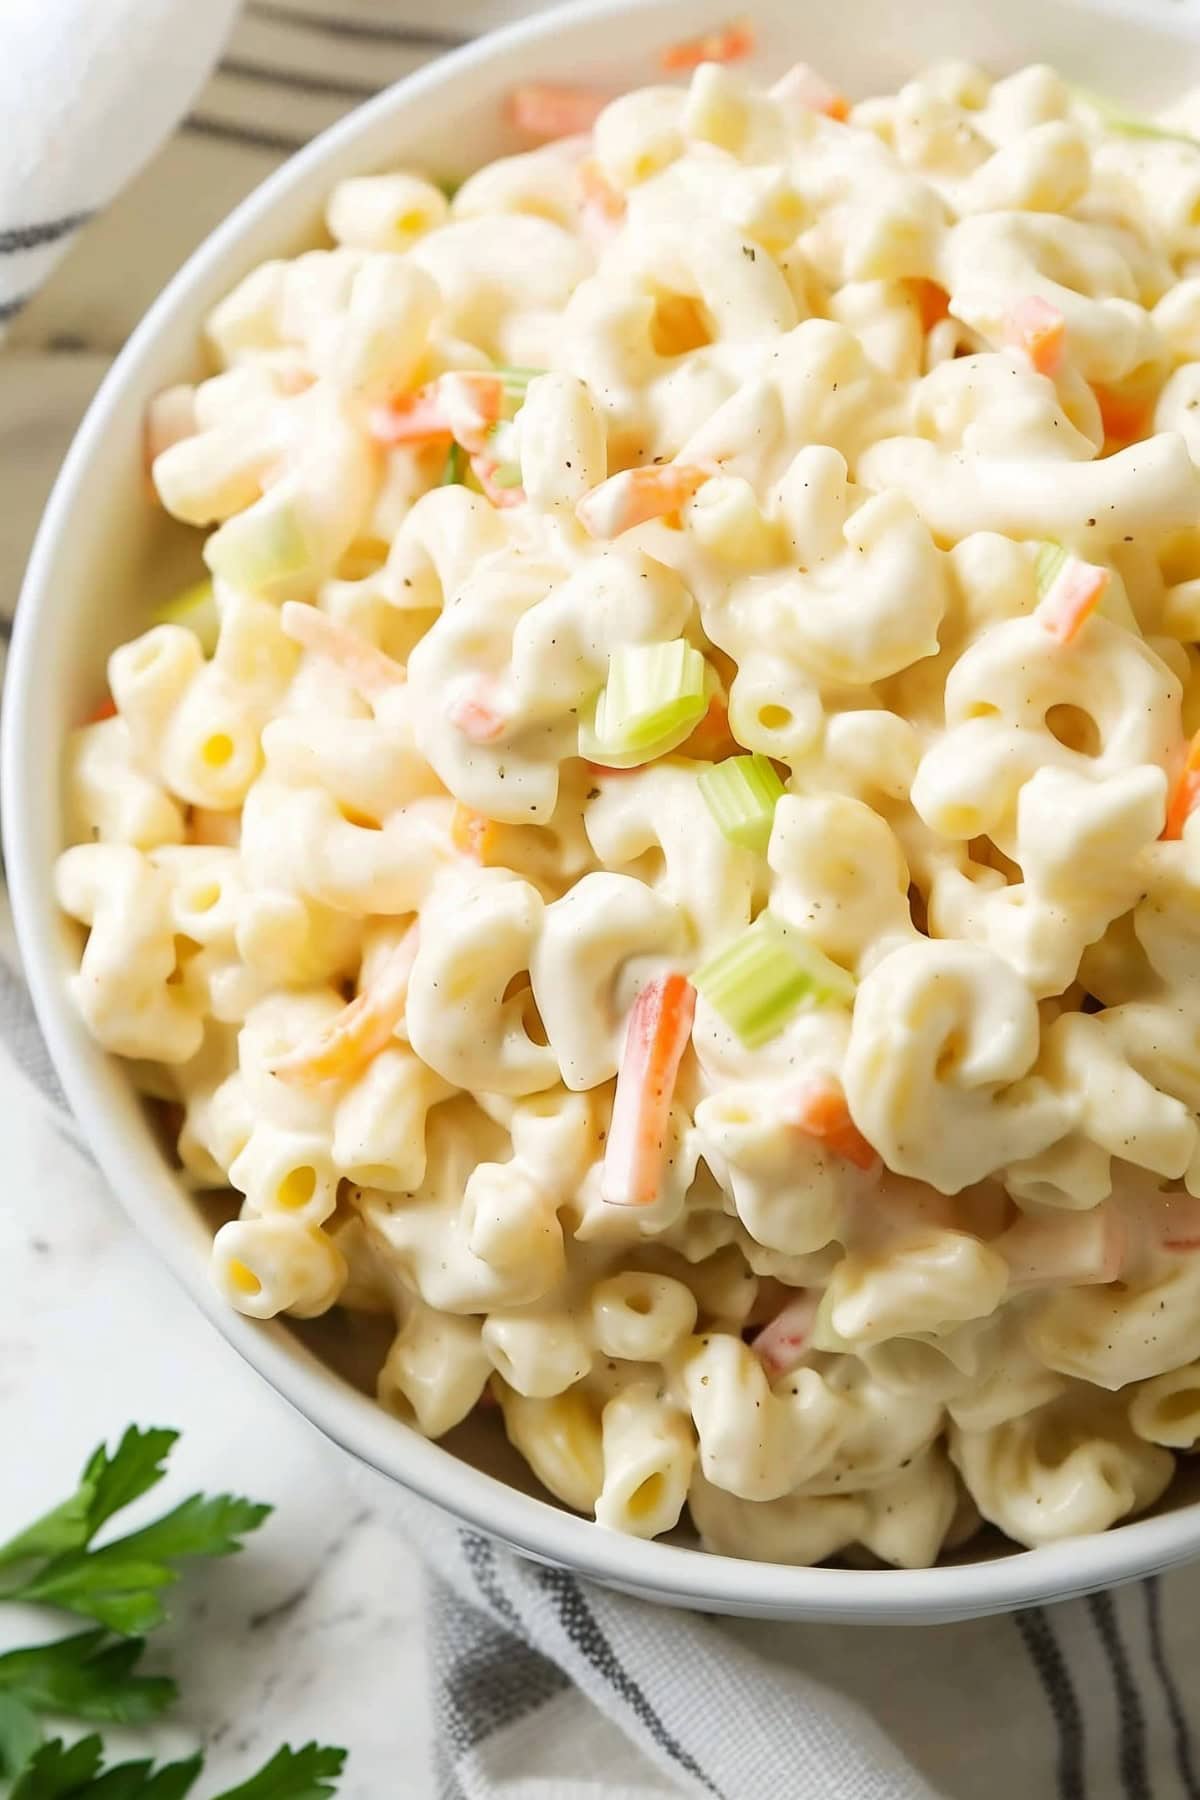 Mouthwatering Hawaiian macaroni salad, a refreshing blend of pasta, carrots, and onions in a creamy dressing